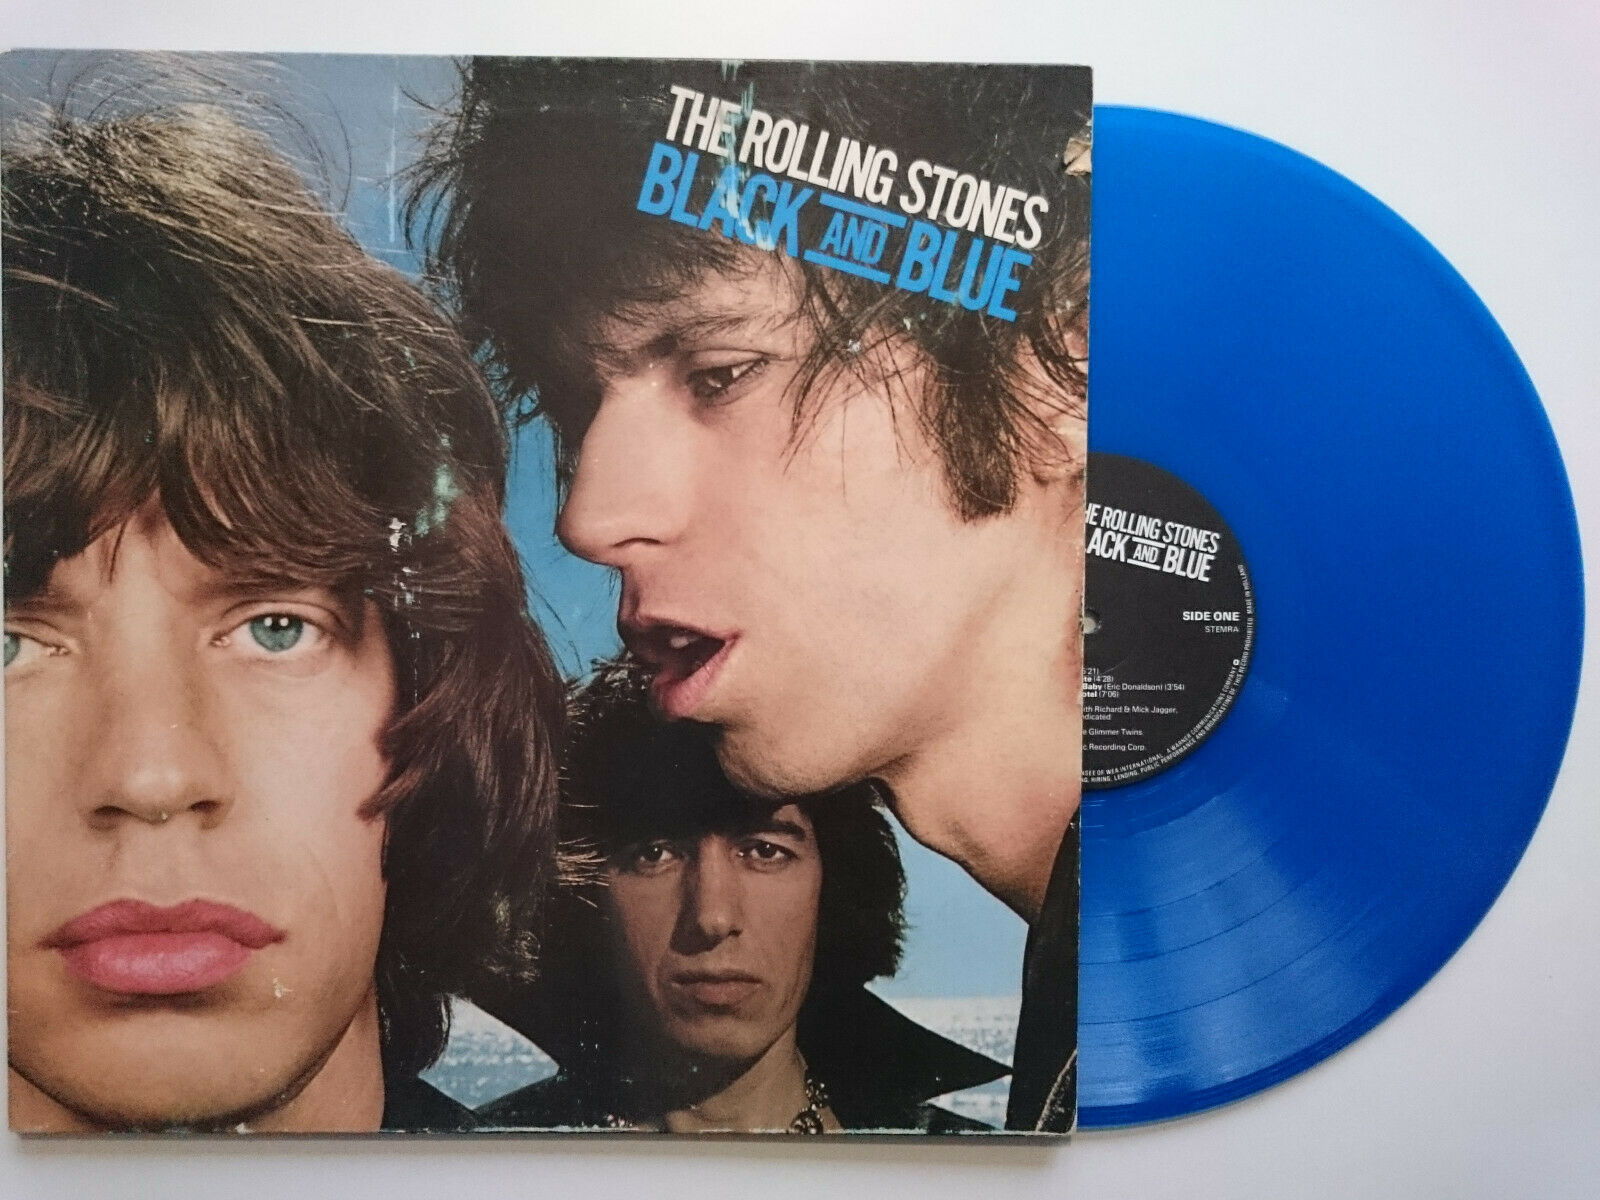 popsike.com - THE ROLLING STONES BLACK AND BLUE COC 59106 MICK JAGGER  RONNIE WOOD BLUE VINYL - auction details